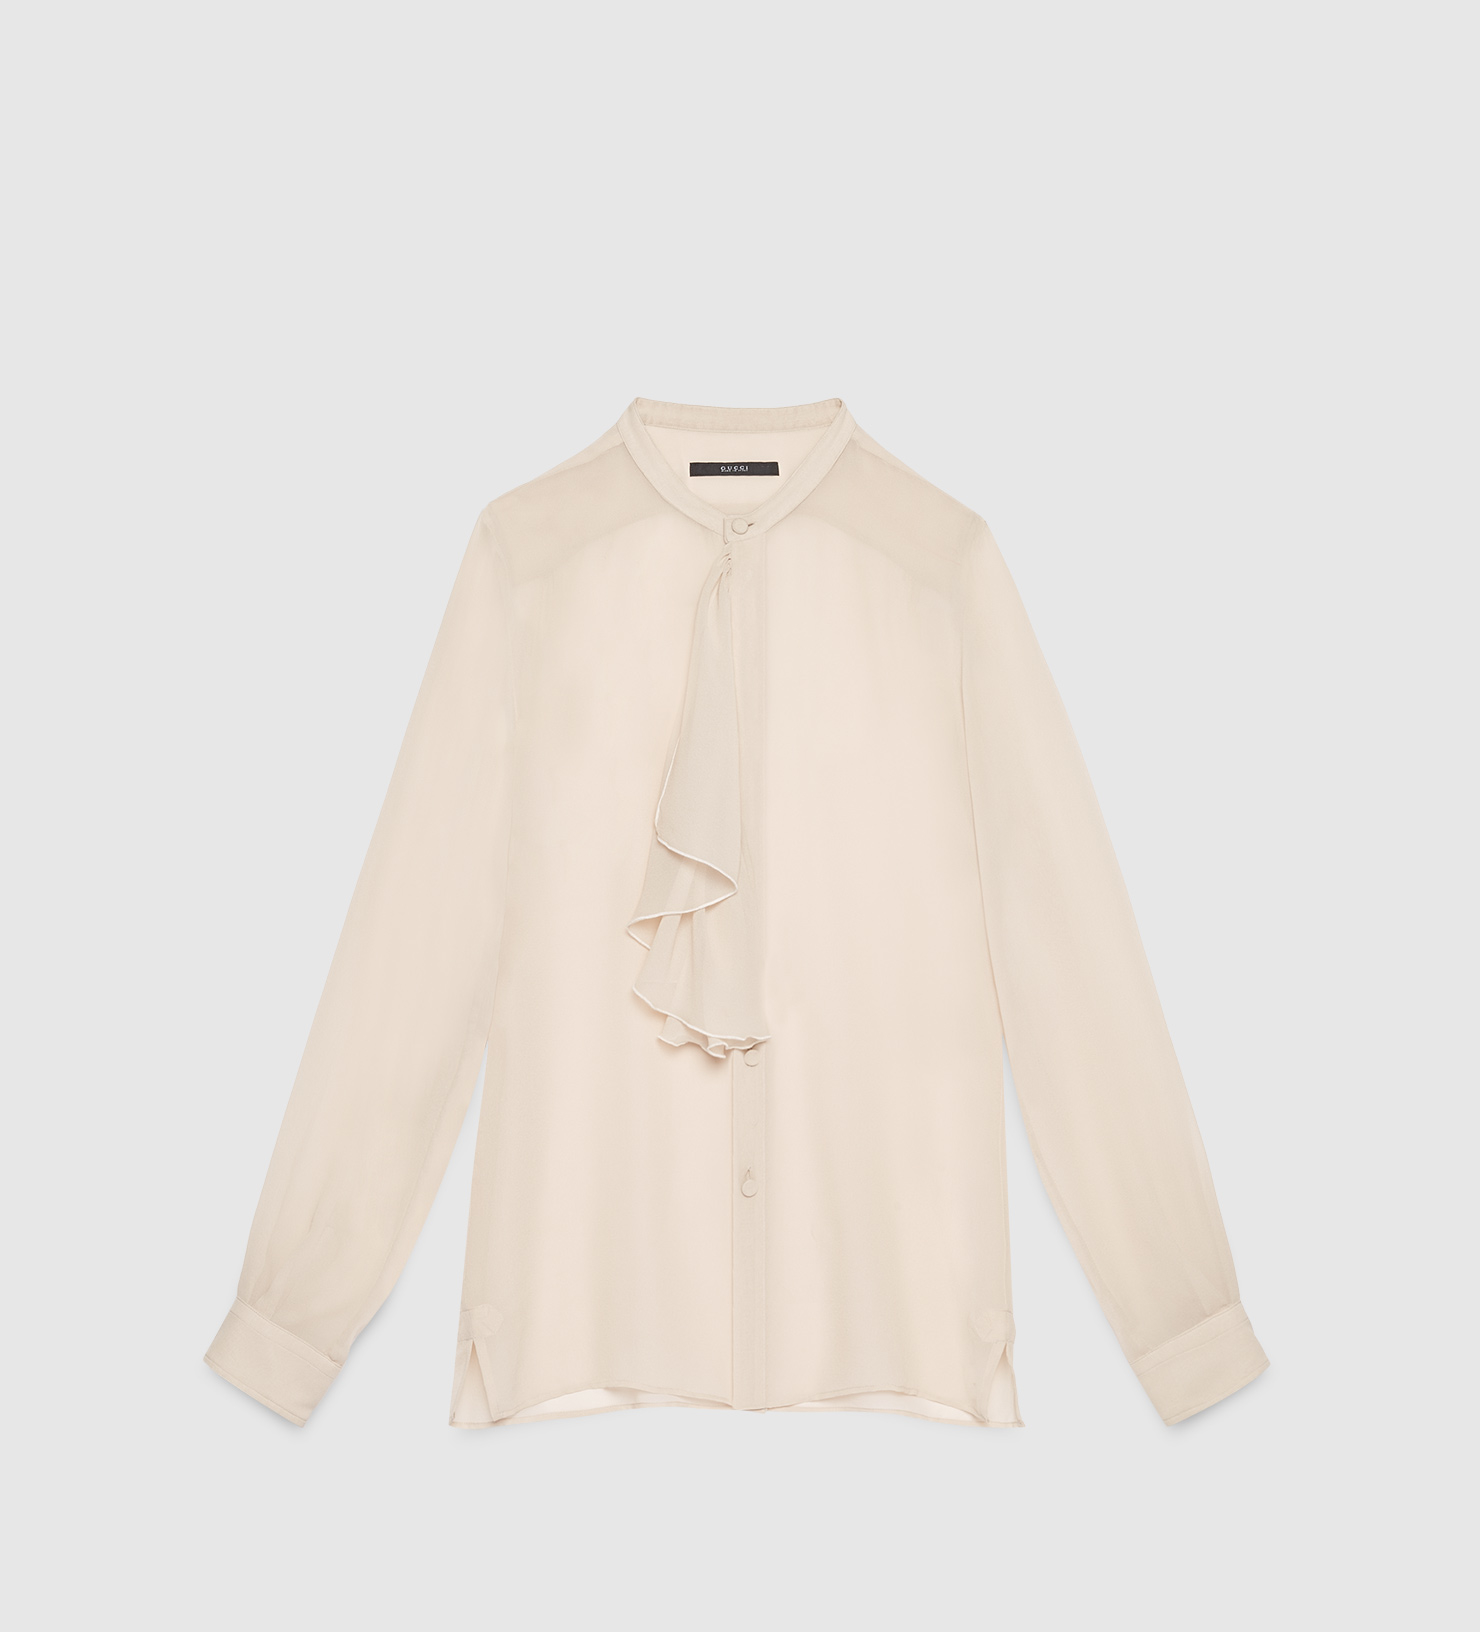 Lyst - Gucci Silk Shirt With Ruffle in Natural for Men